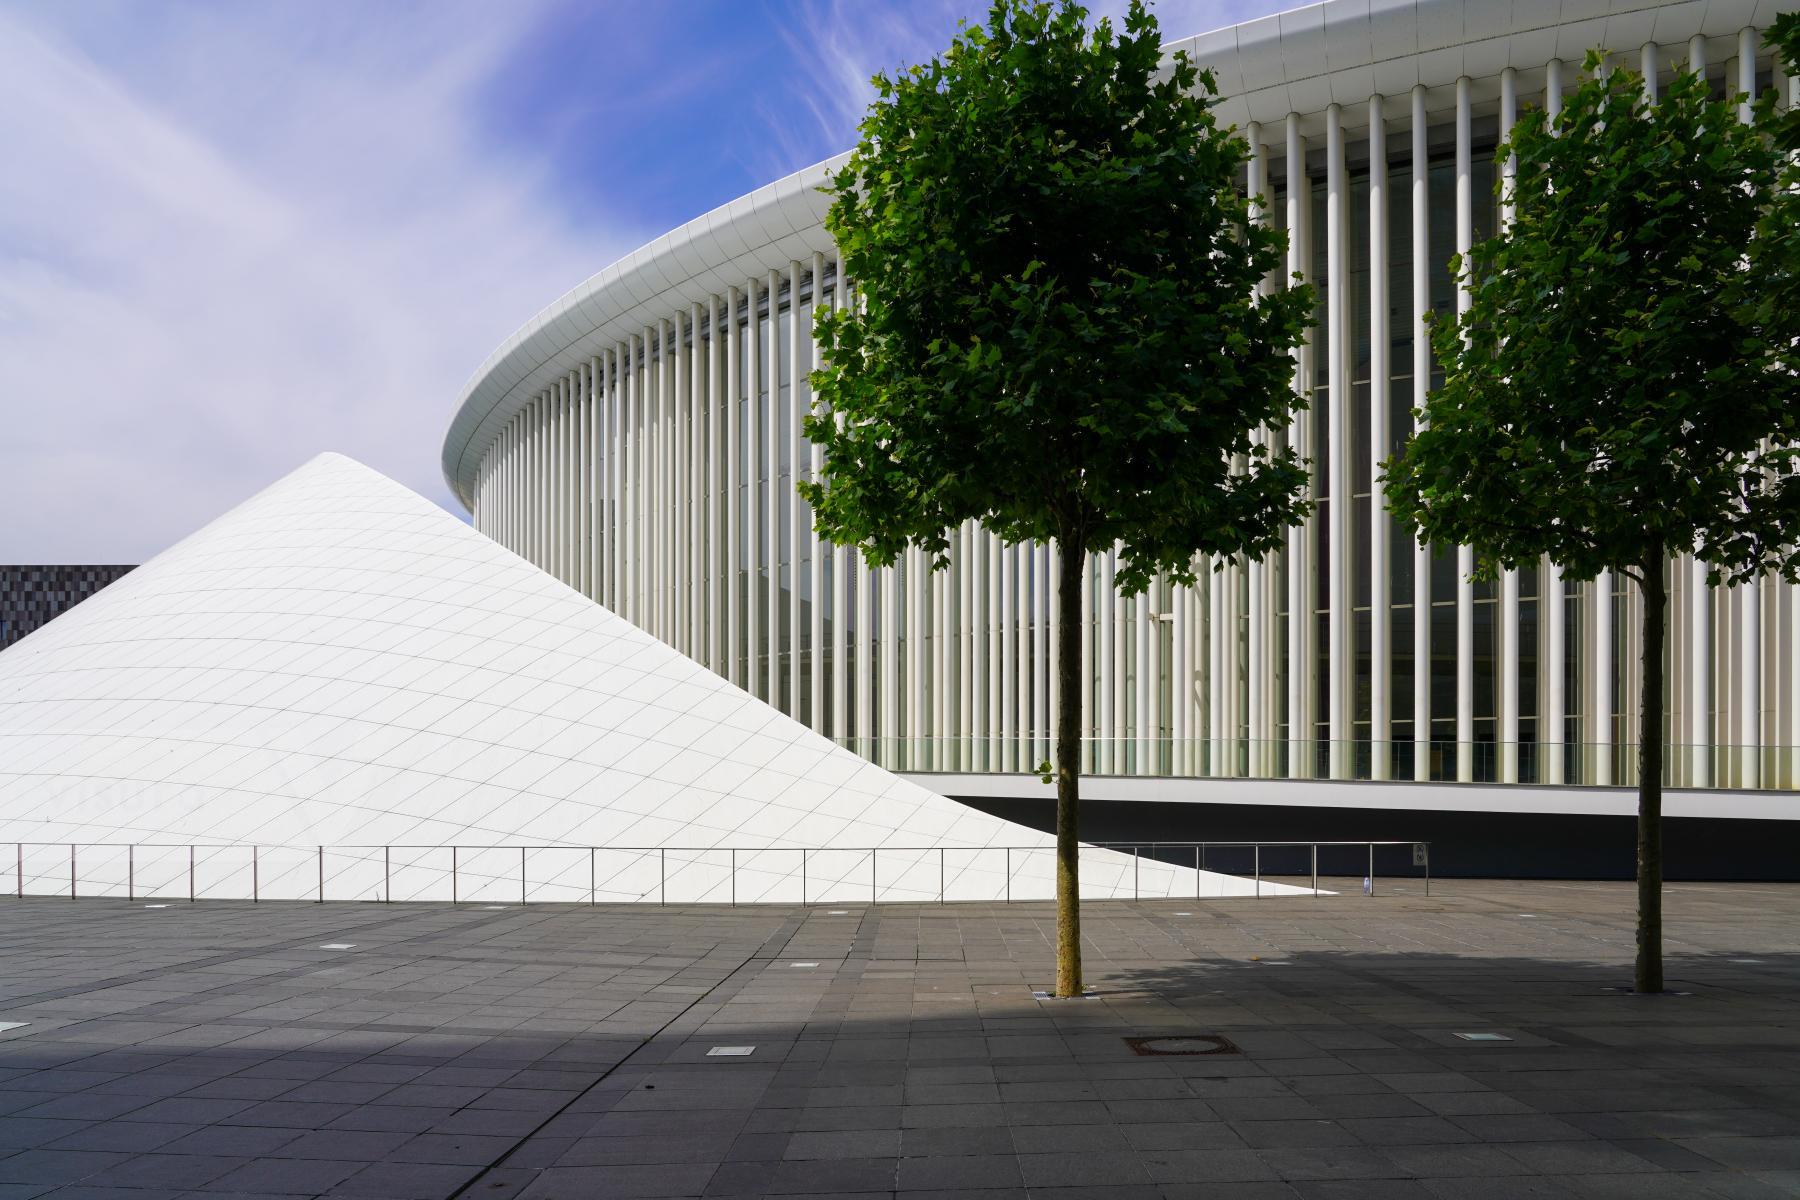 Purchase Philharmonie Luxembourg by Michael Nguyen